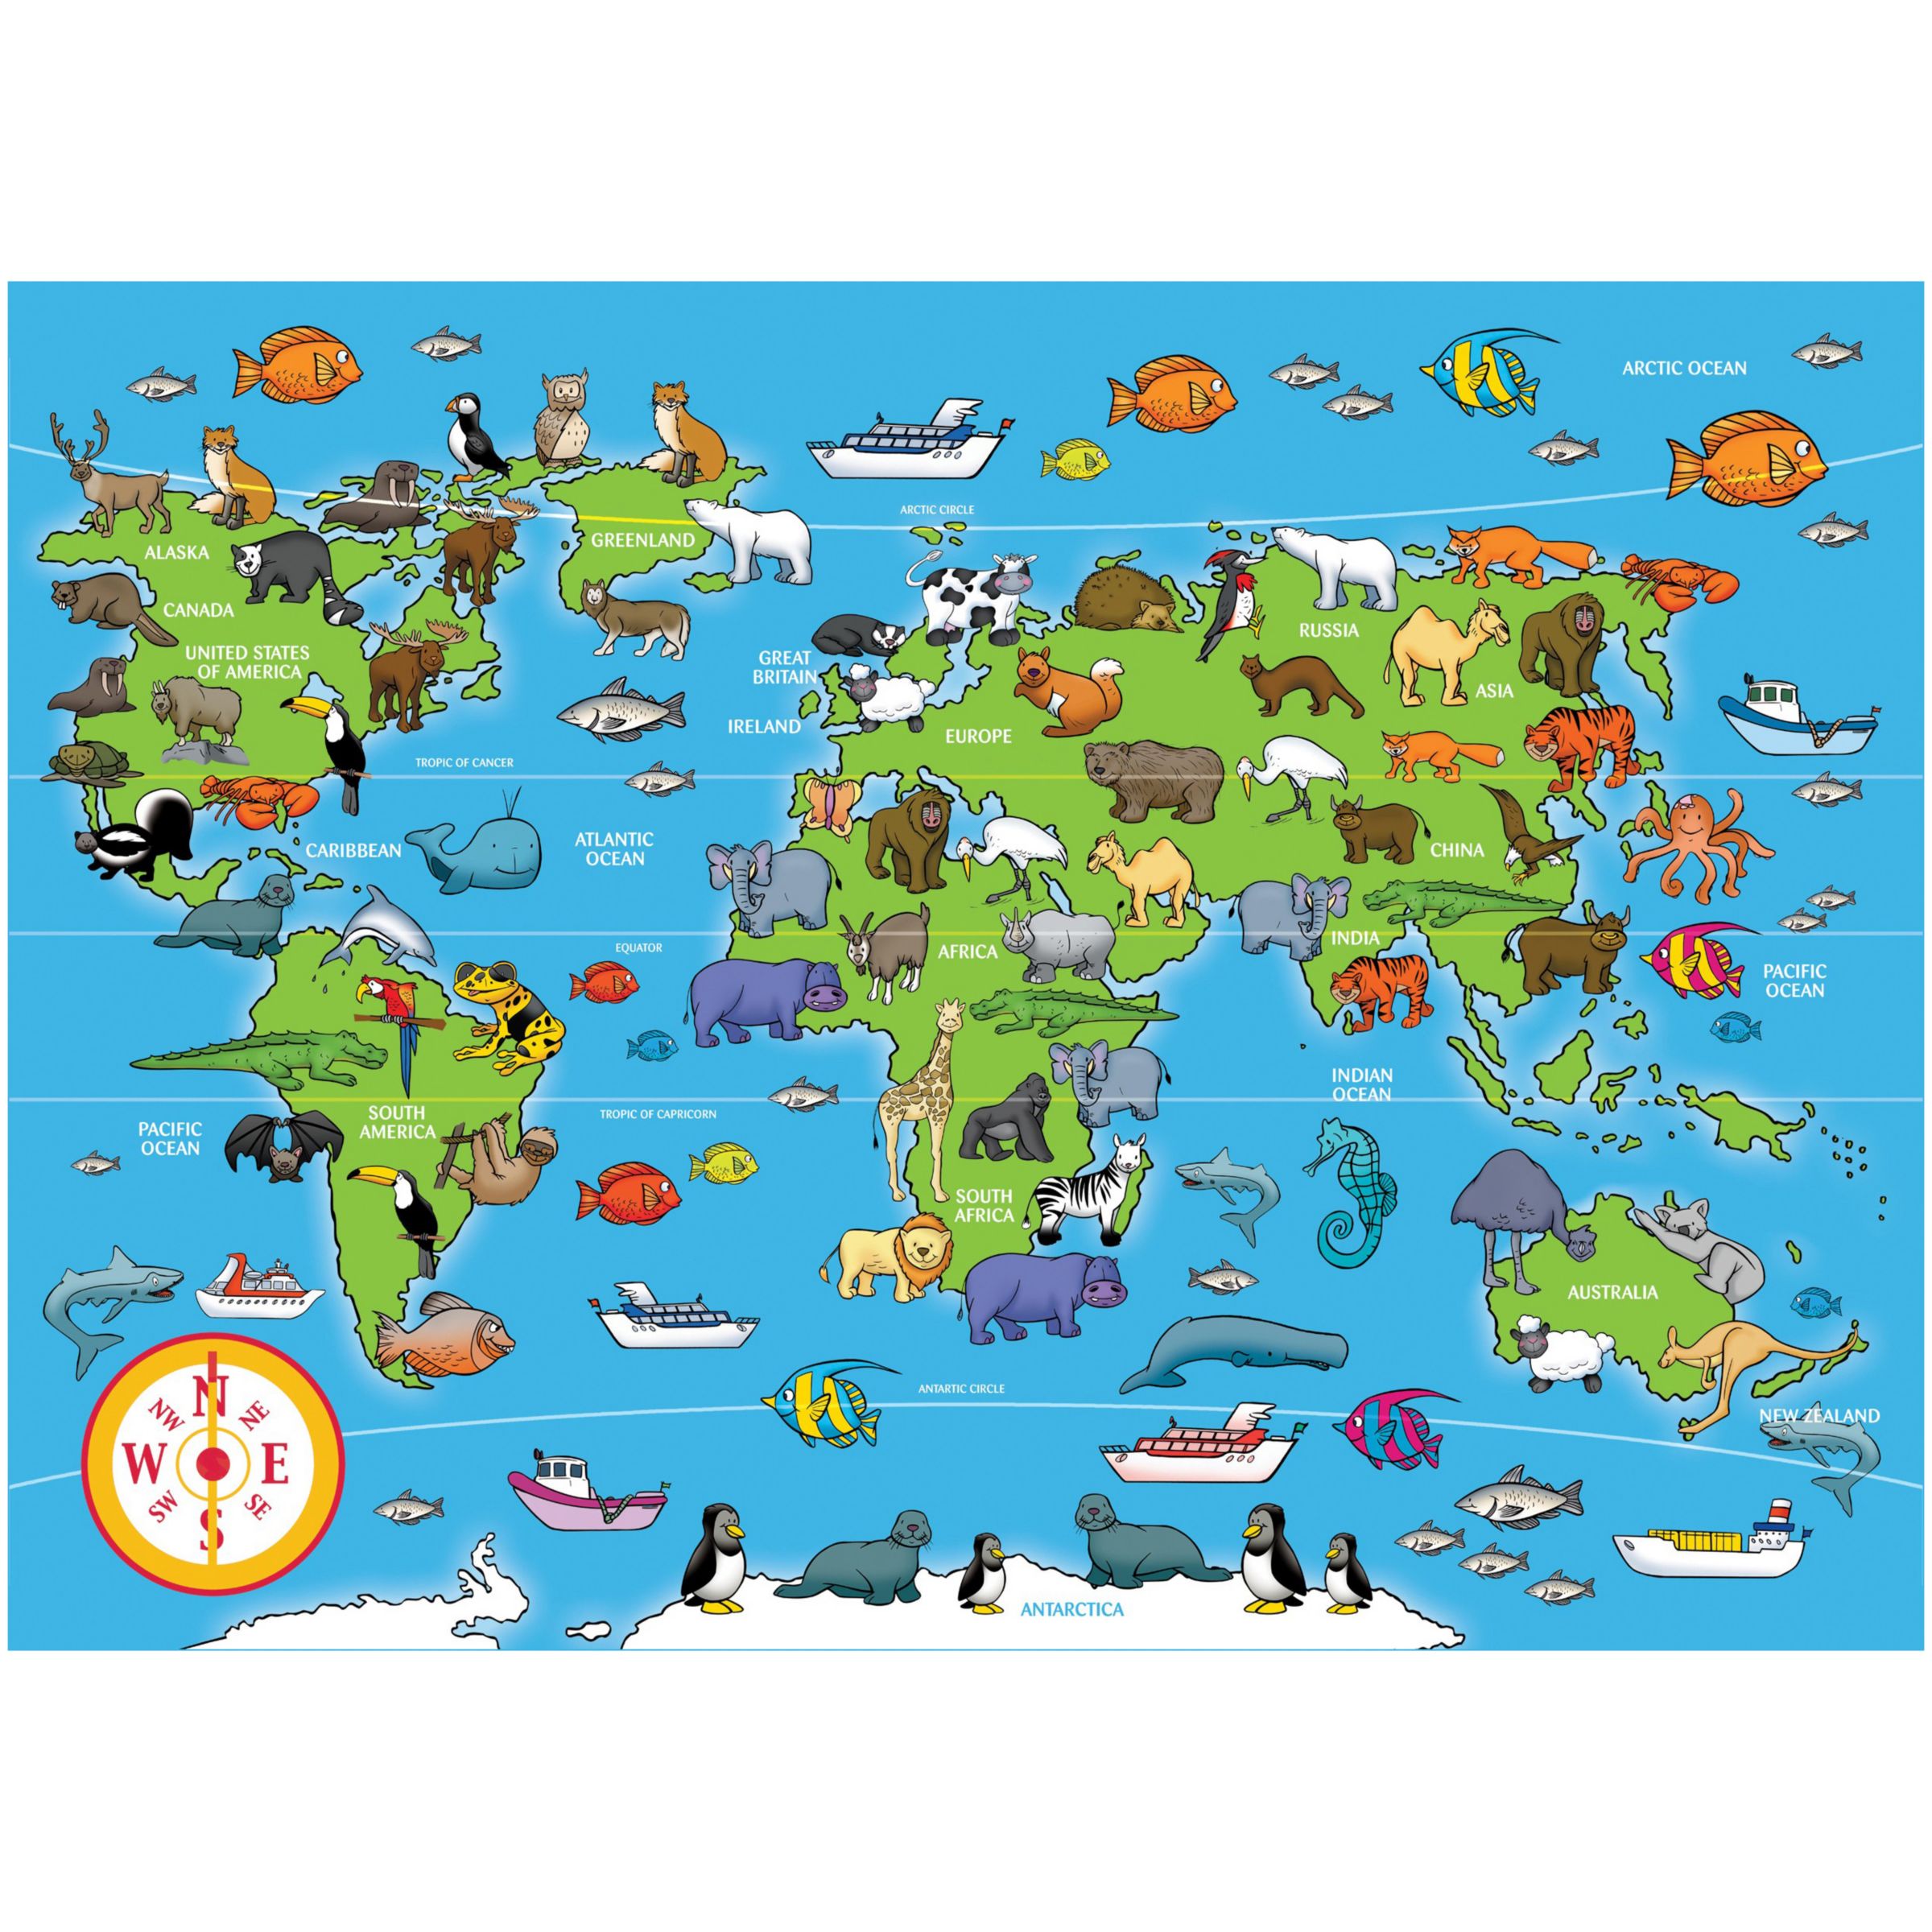 Animals of the World Jigsaw Puzzle